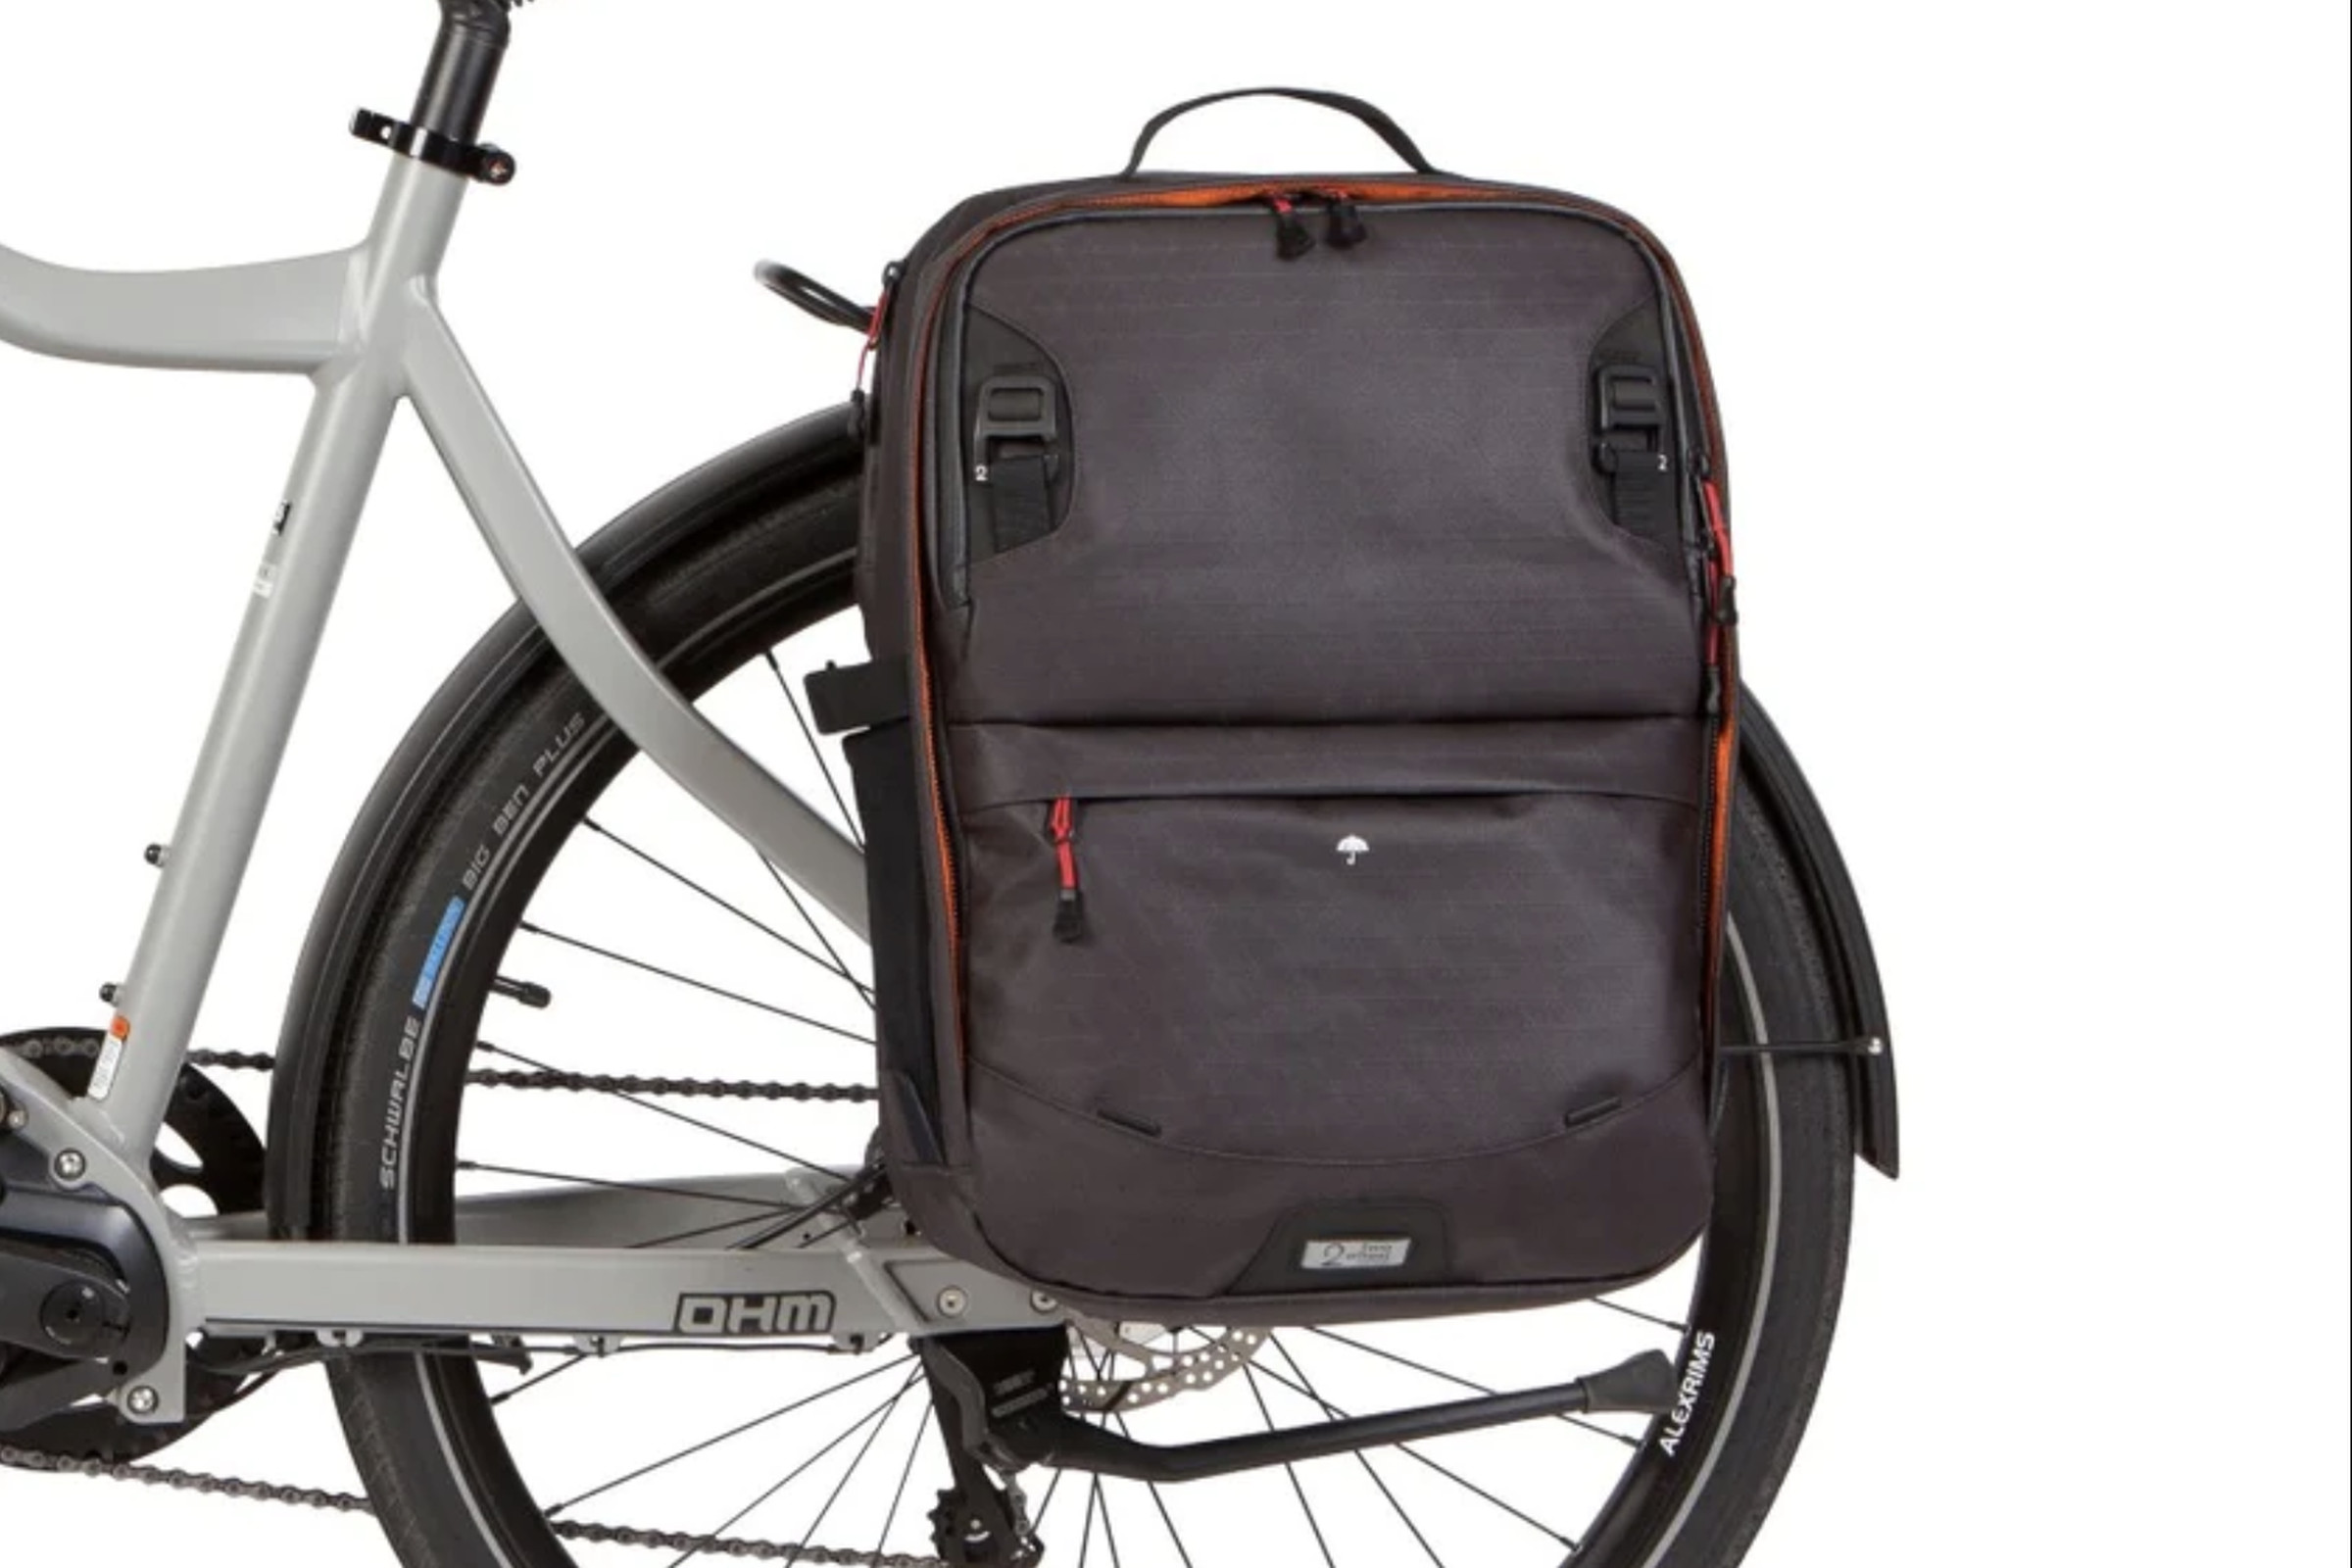 The back end of a bicycle with a backpack attached above the rear wheel.